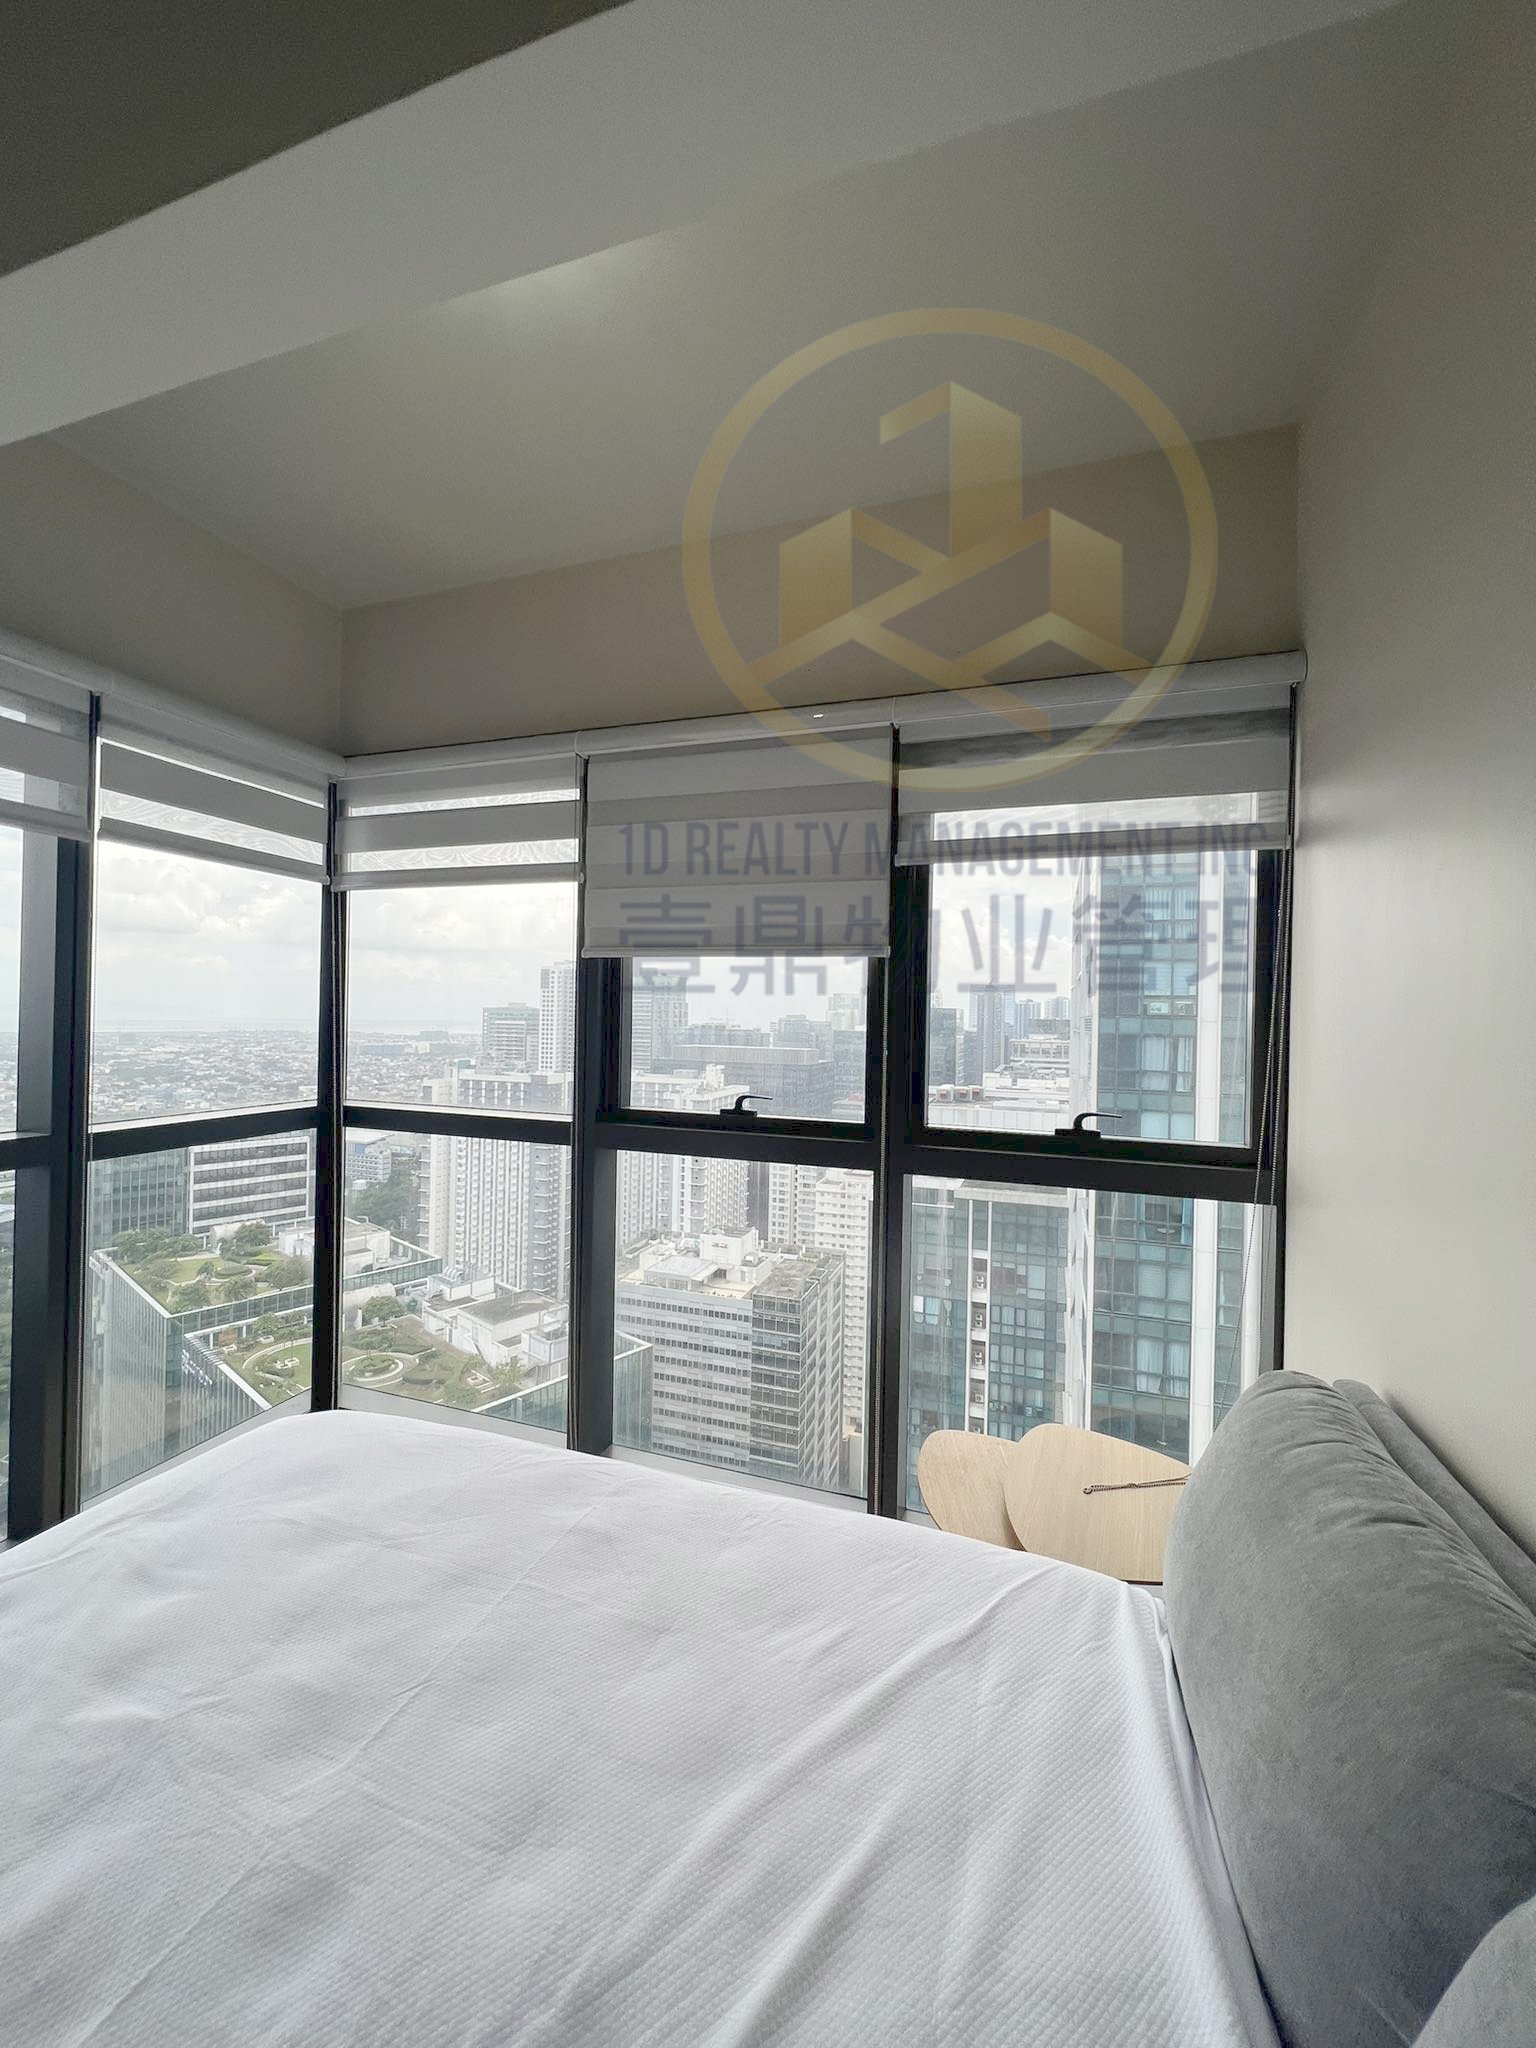 FOR SALE 4BR - Uptown Ritz Residence - 9th Ave, Taguig